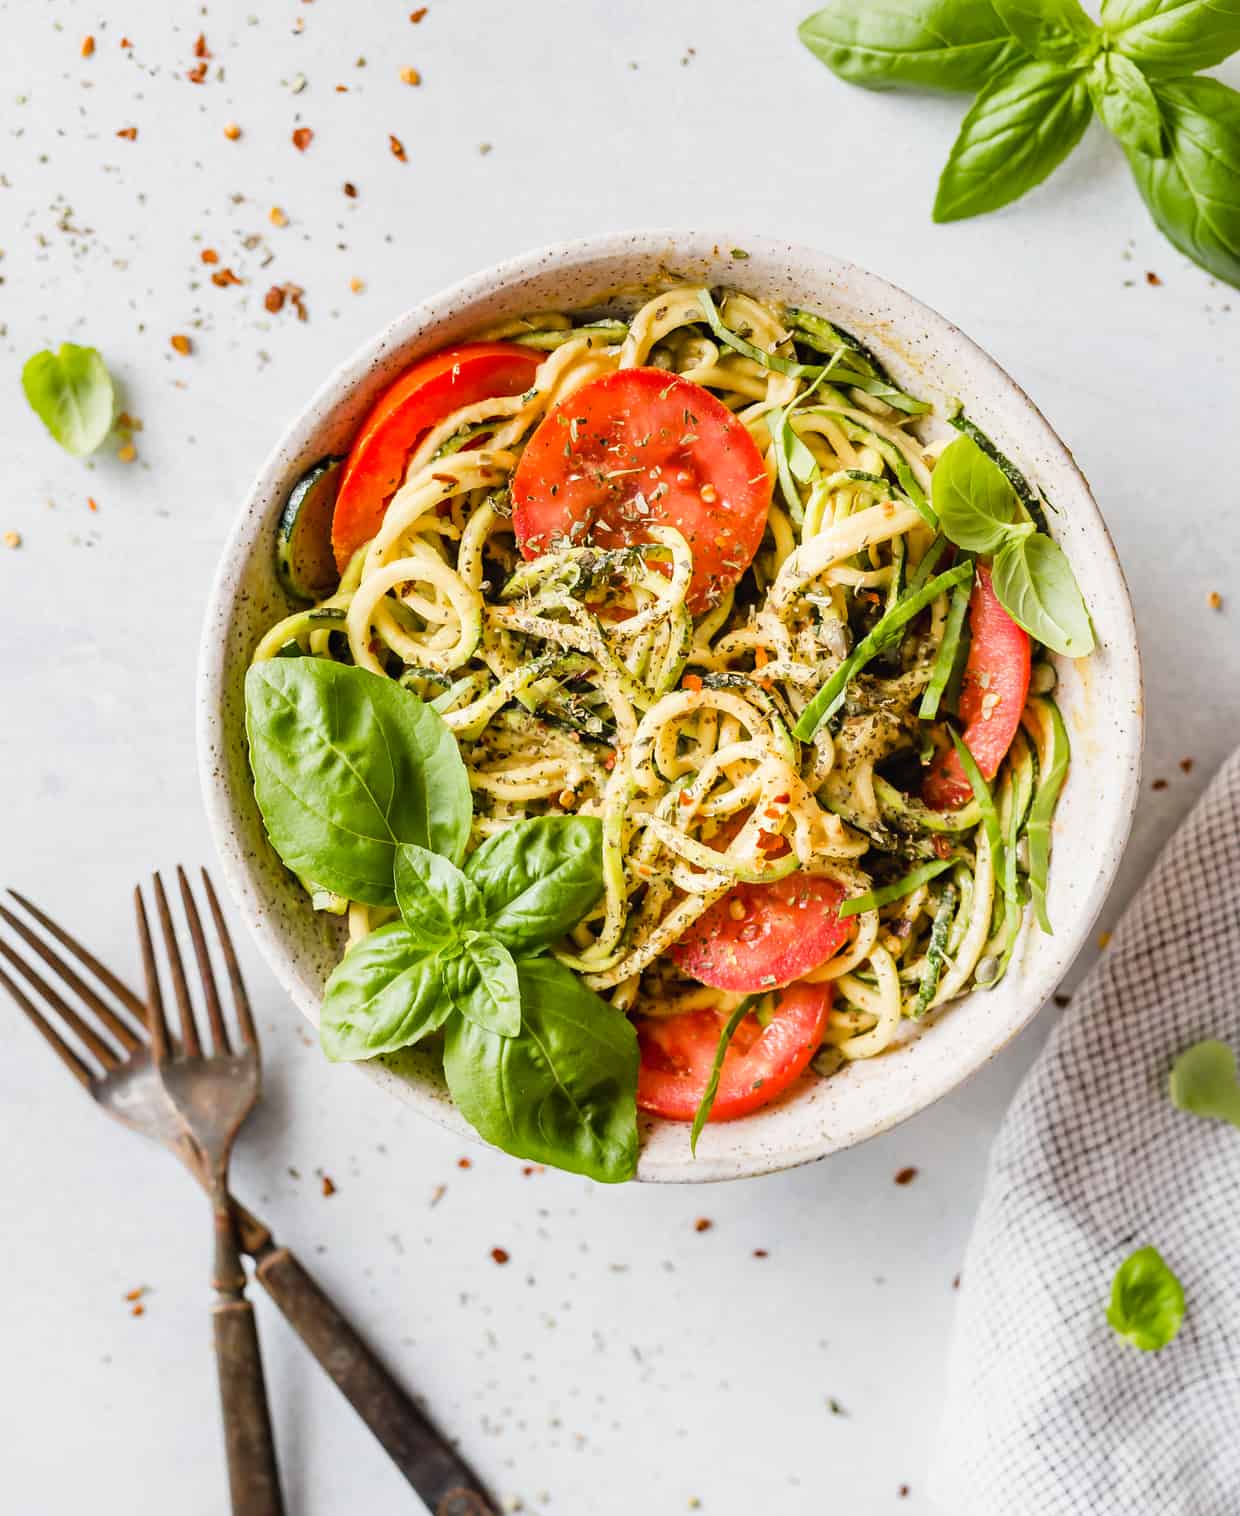 Zucchini noodles are used to make this 5-Minute Cheesy Zucchetti Bowl! Topped with bright red tomatoes, fresh basil, and Italian seasoning this dish is delicious!